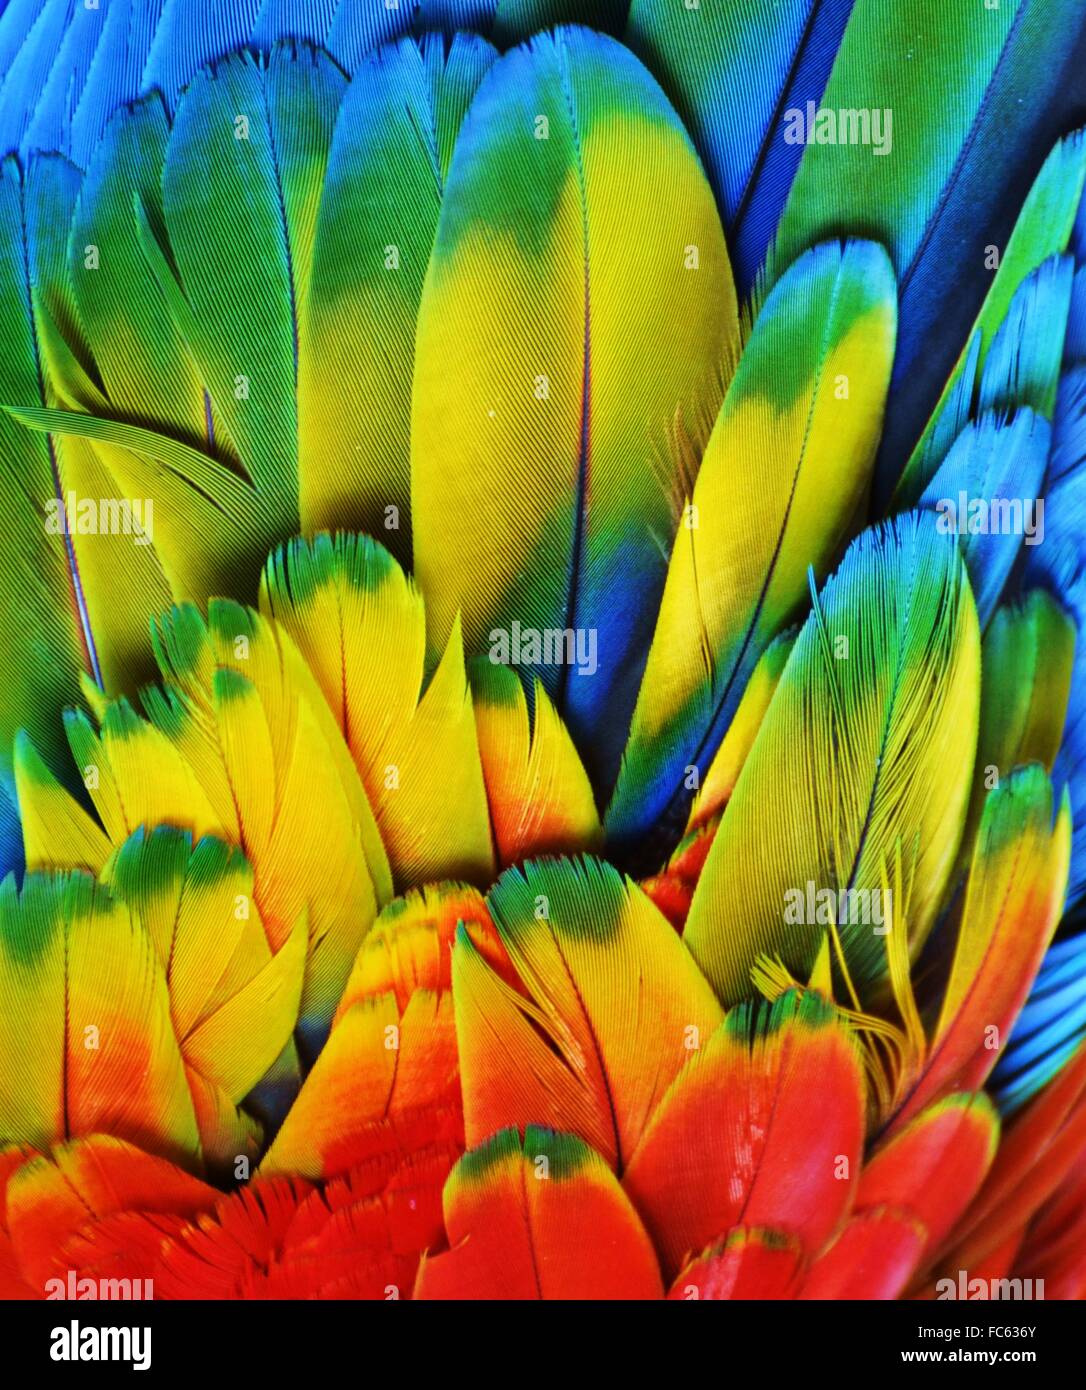 Rainbow-colored bird feathers from a scarlet macaw parrot Stock Photo